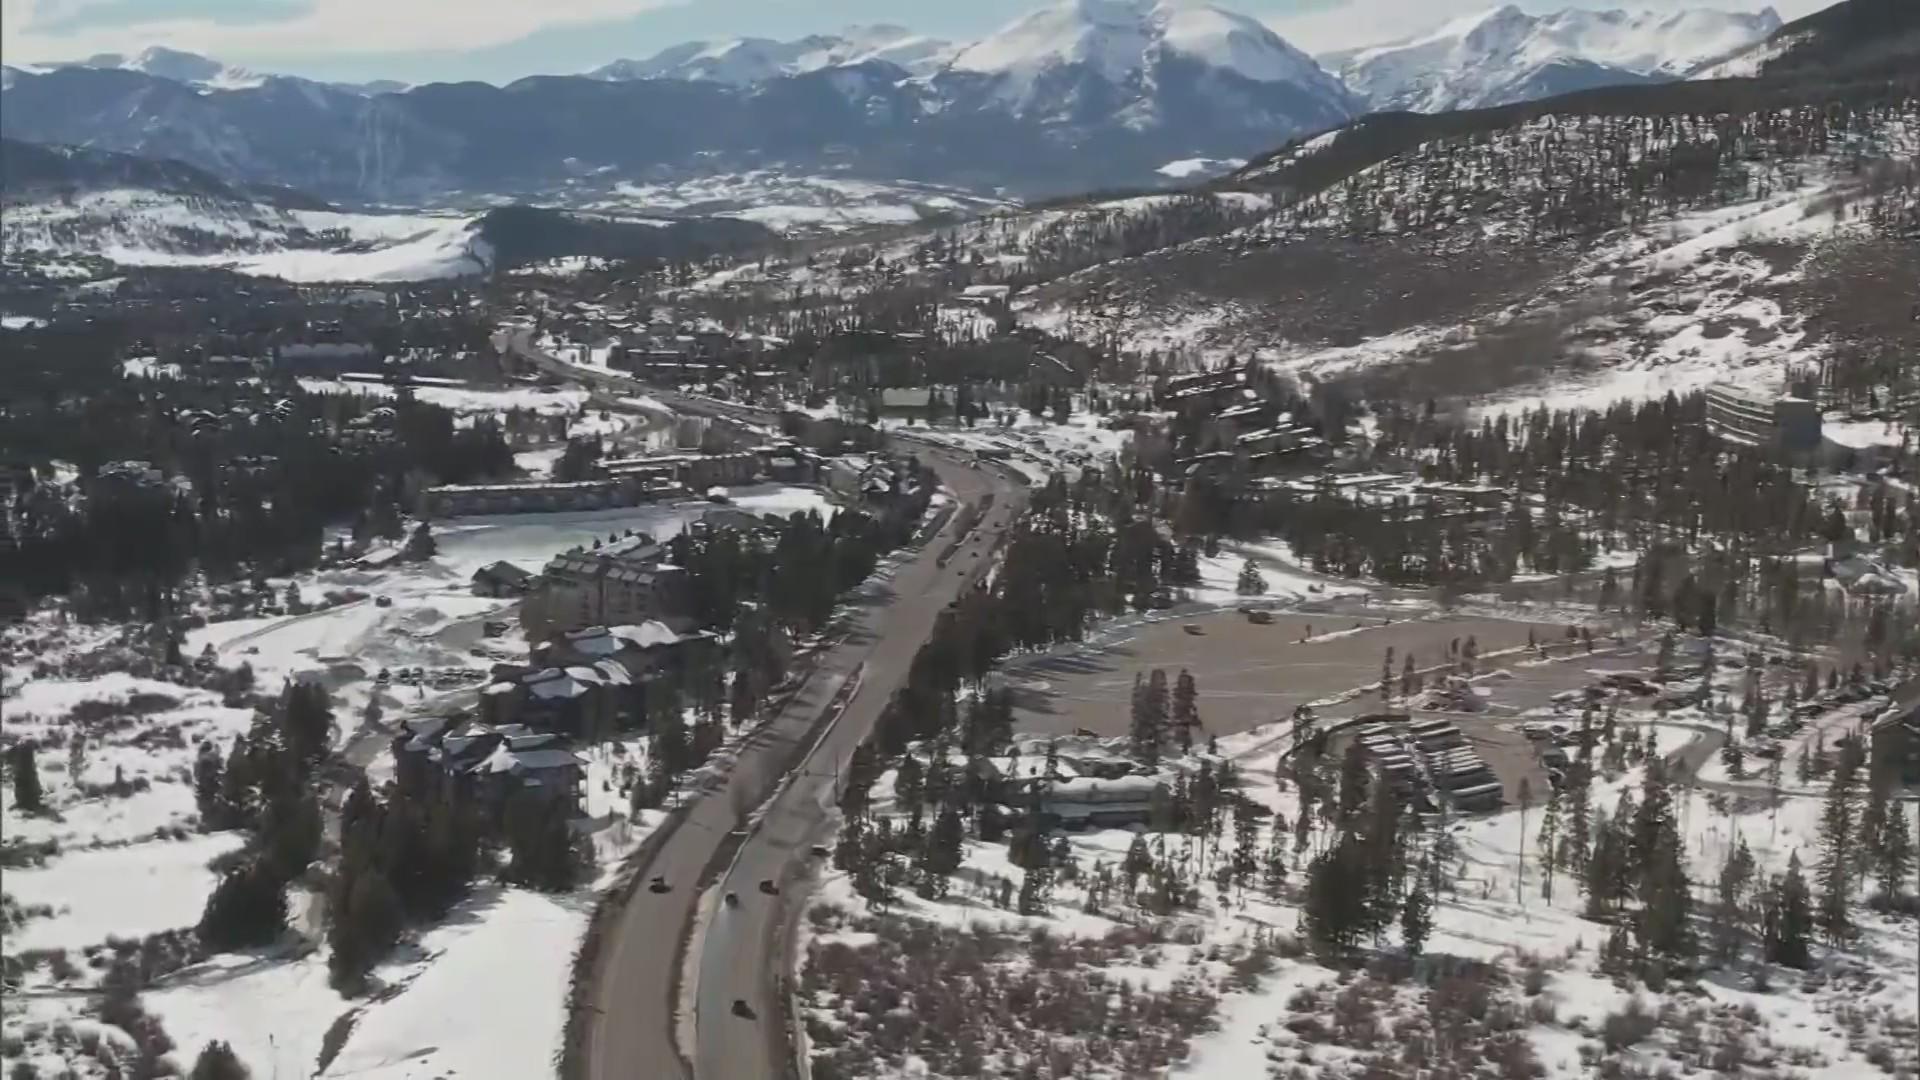 A vote this month could make Keystone Colorado's newest town. For  residents, it's brought excitement, skepticism and uncertainty